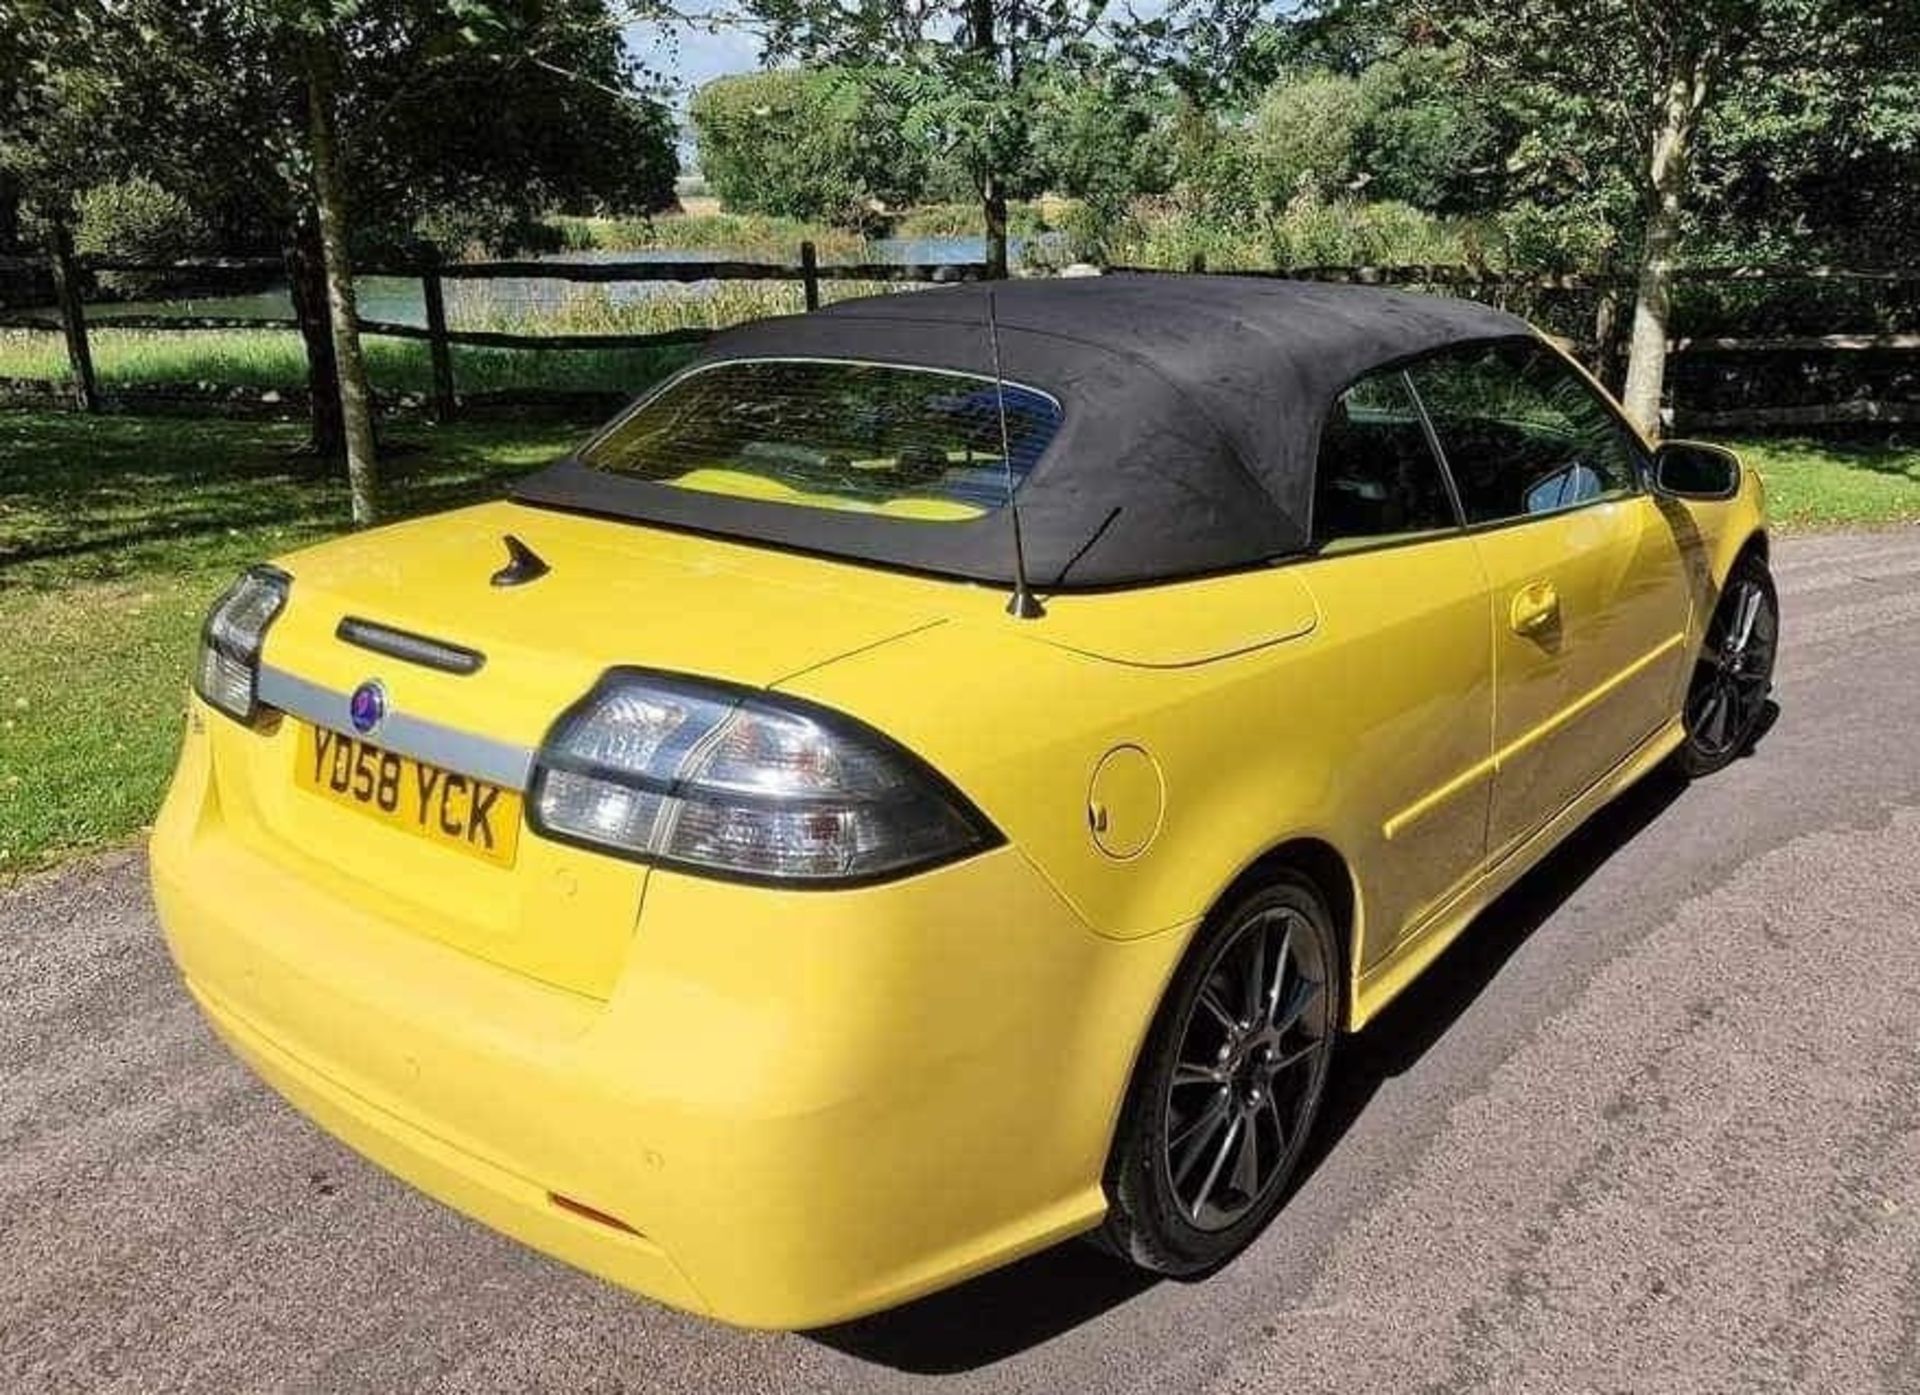 2009 Saab 9-3 Vector 1.8 Convertible Registration number YD58 YCK Saffron yellow with a black